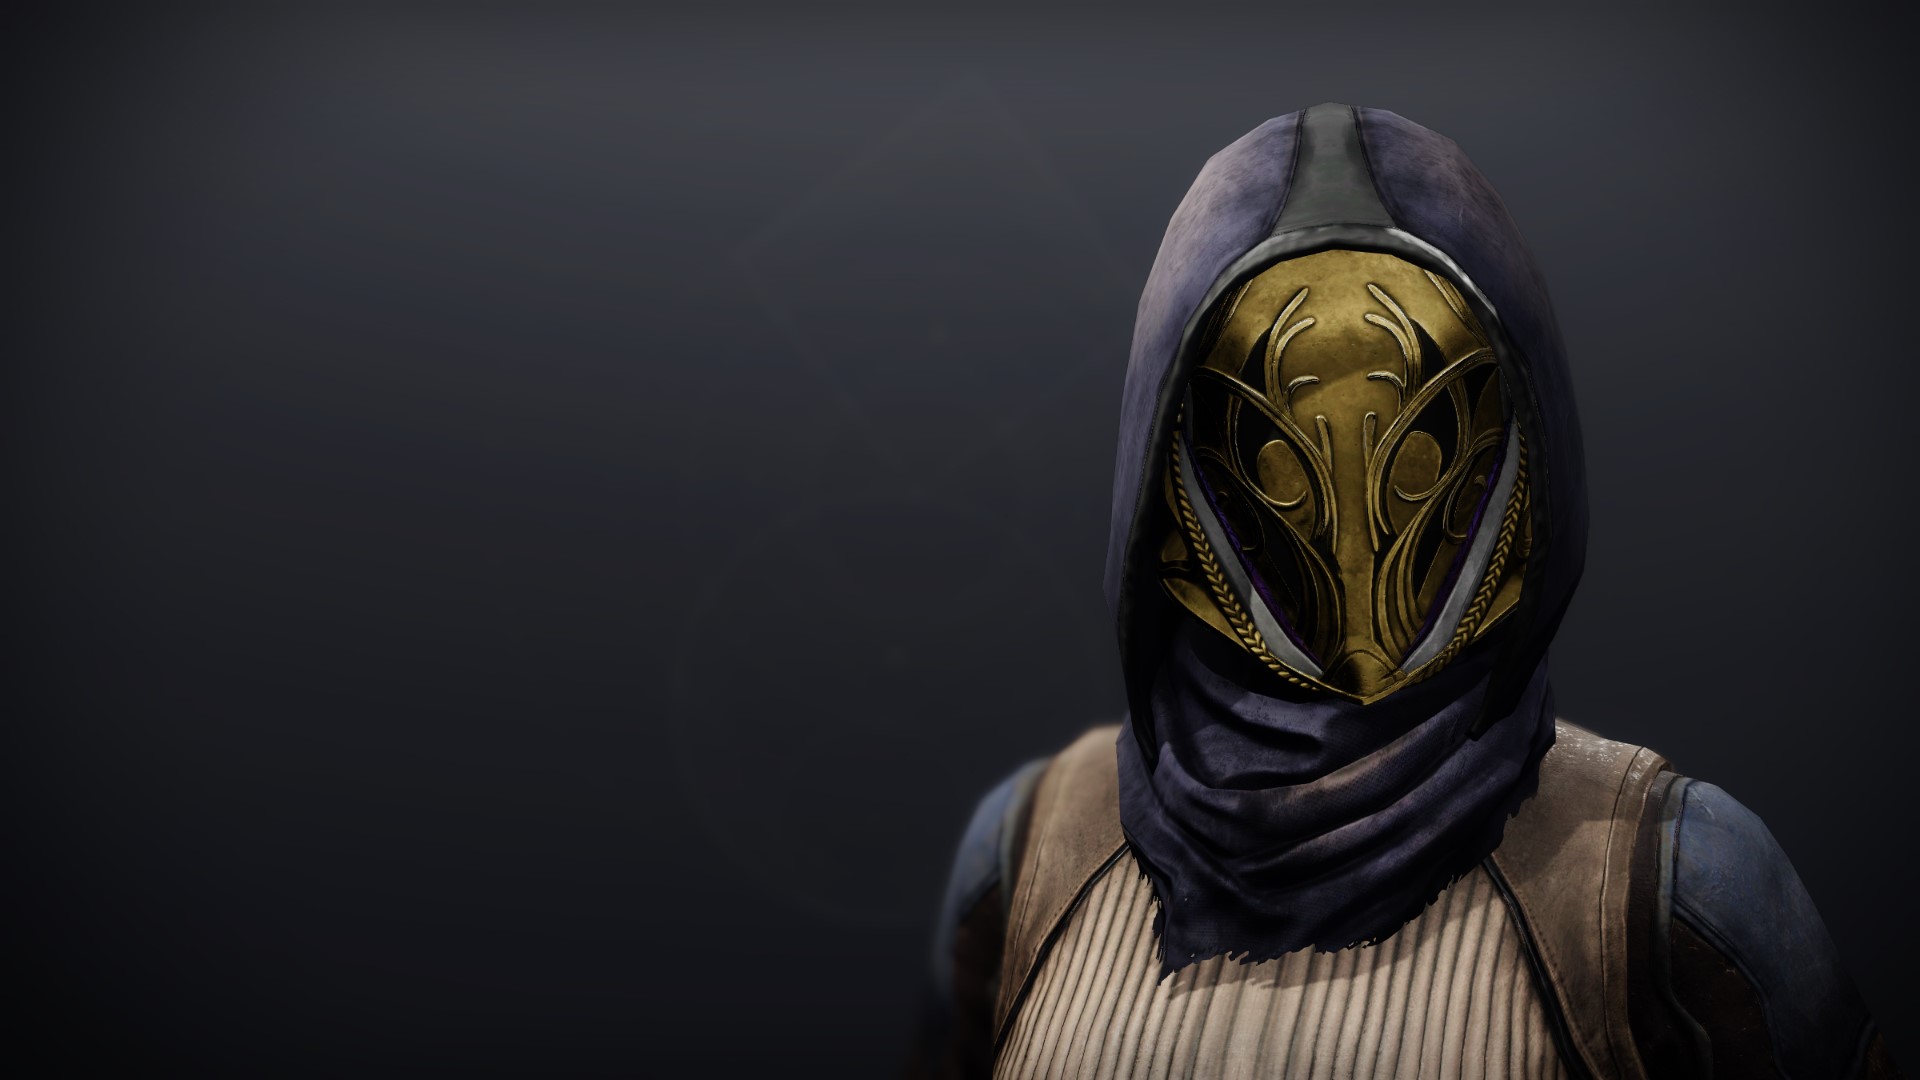 An in-game render of the Illuminus Mask (Majestic).